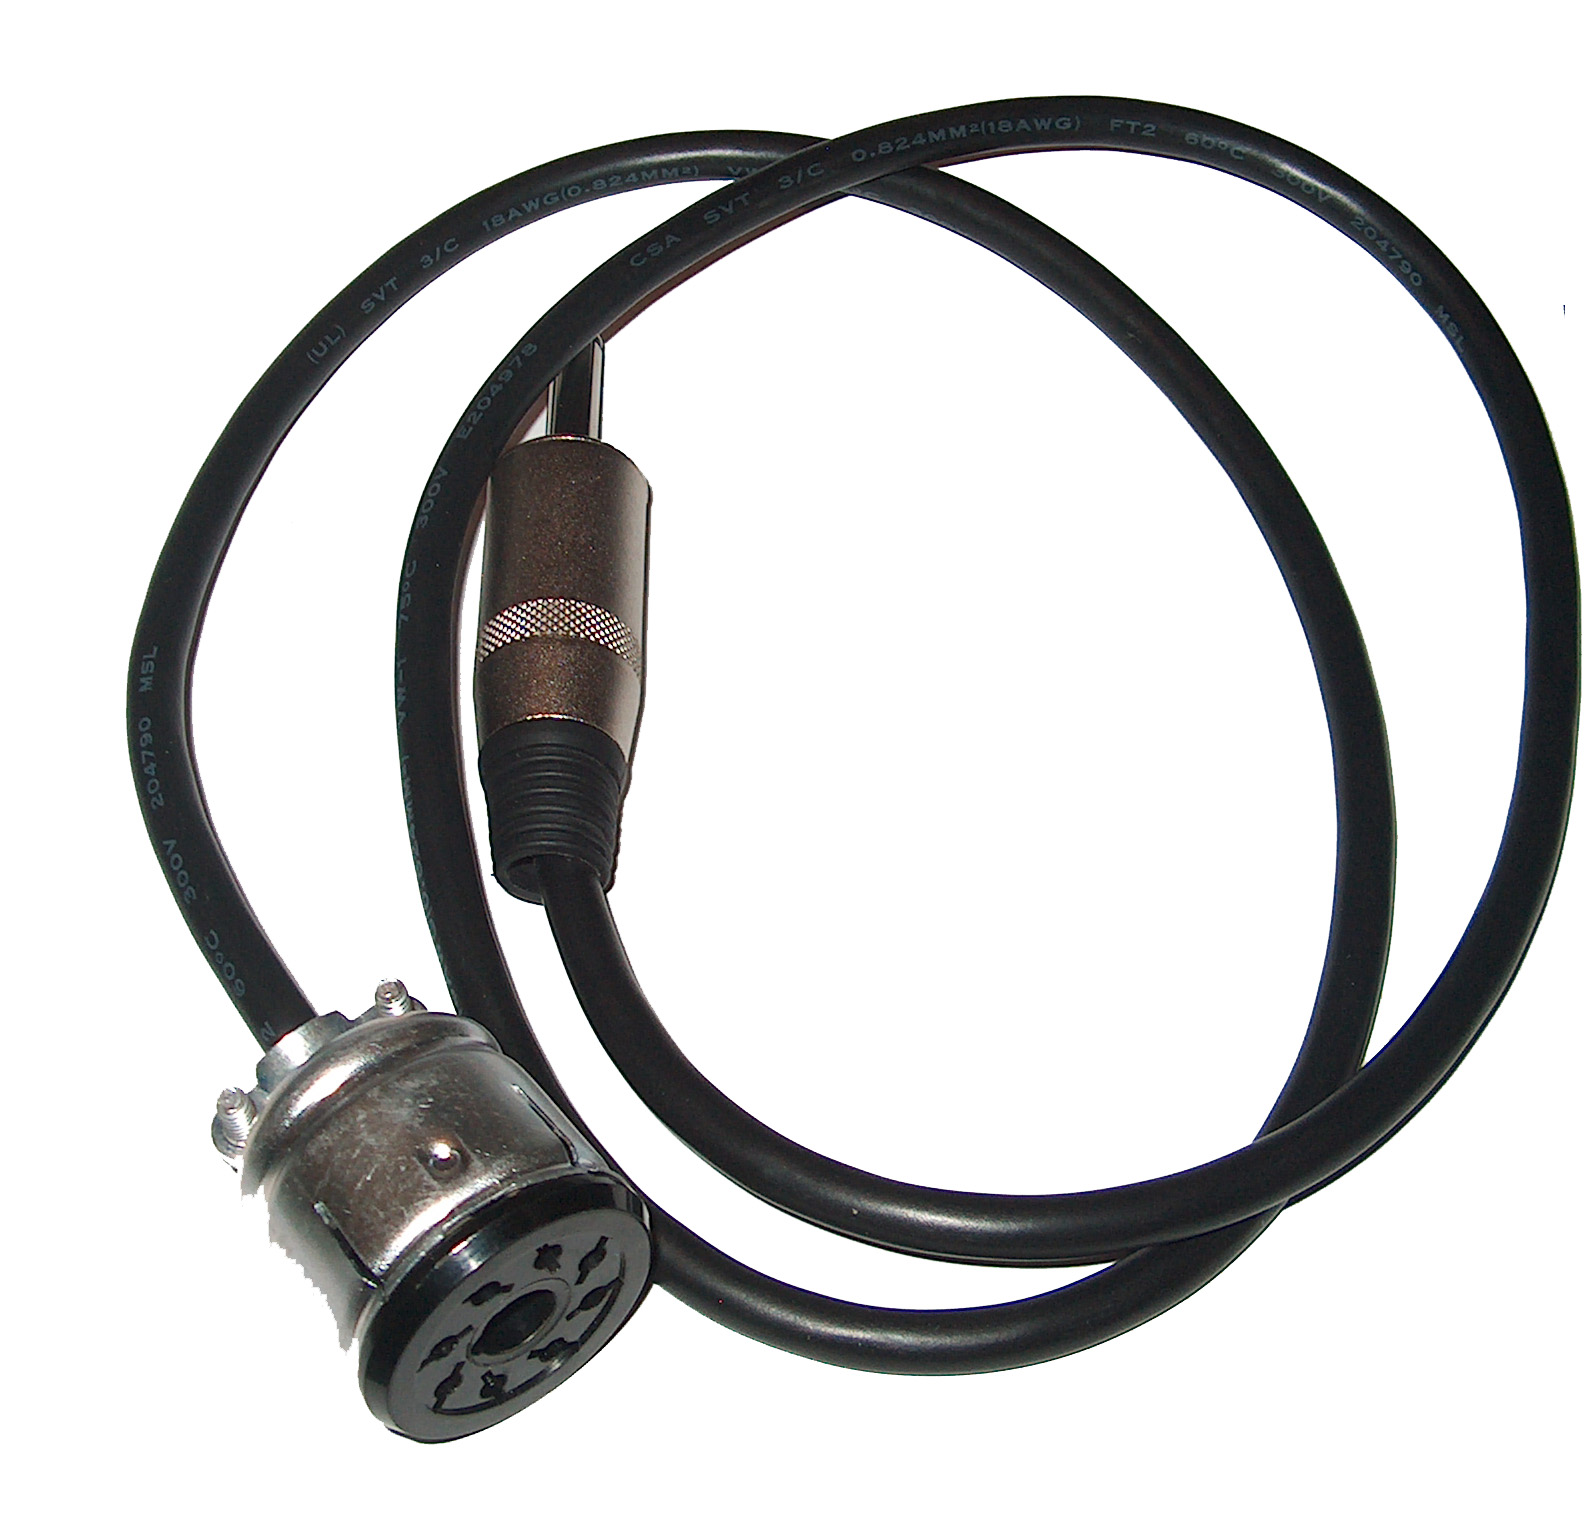 Ampenol to 1/4` conversion cable.